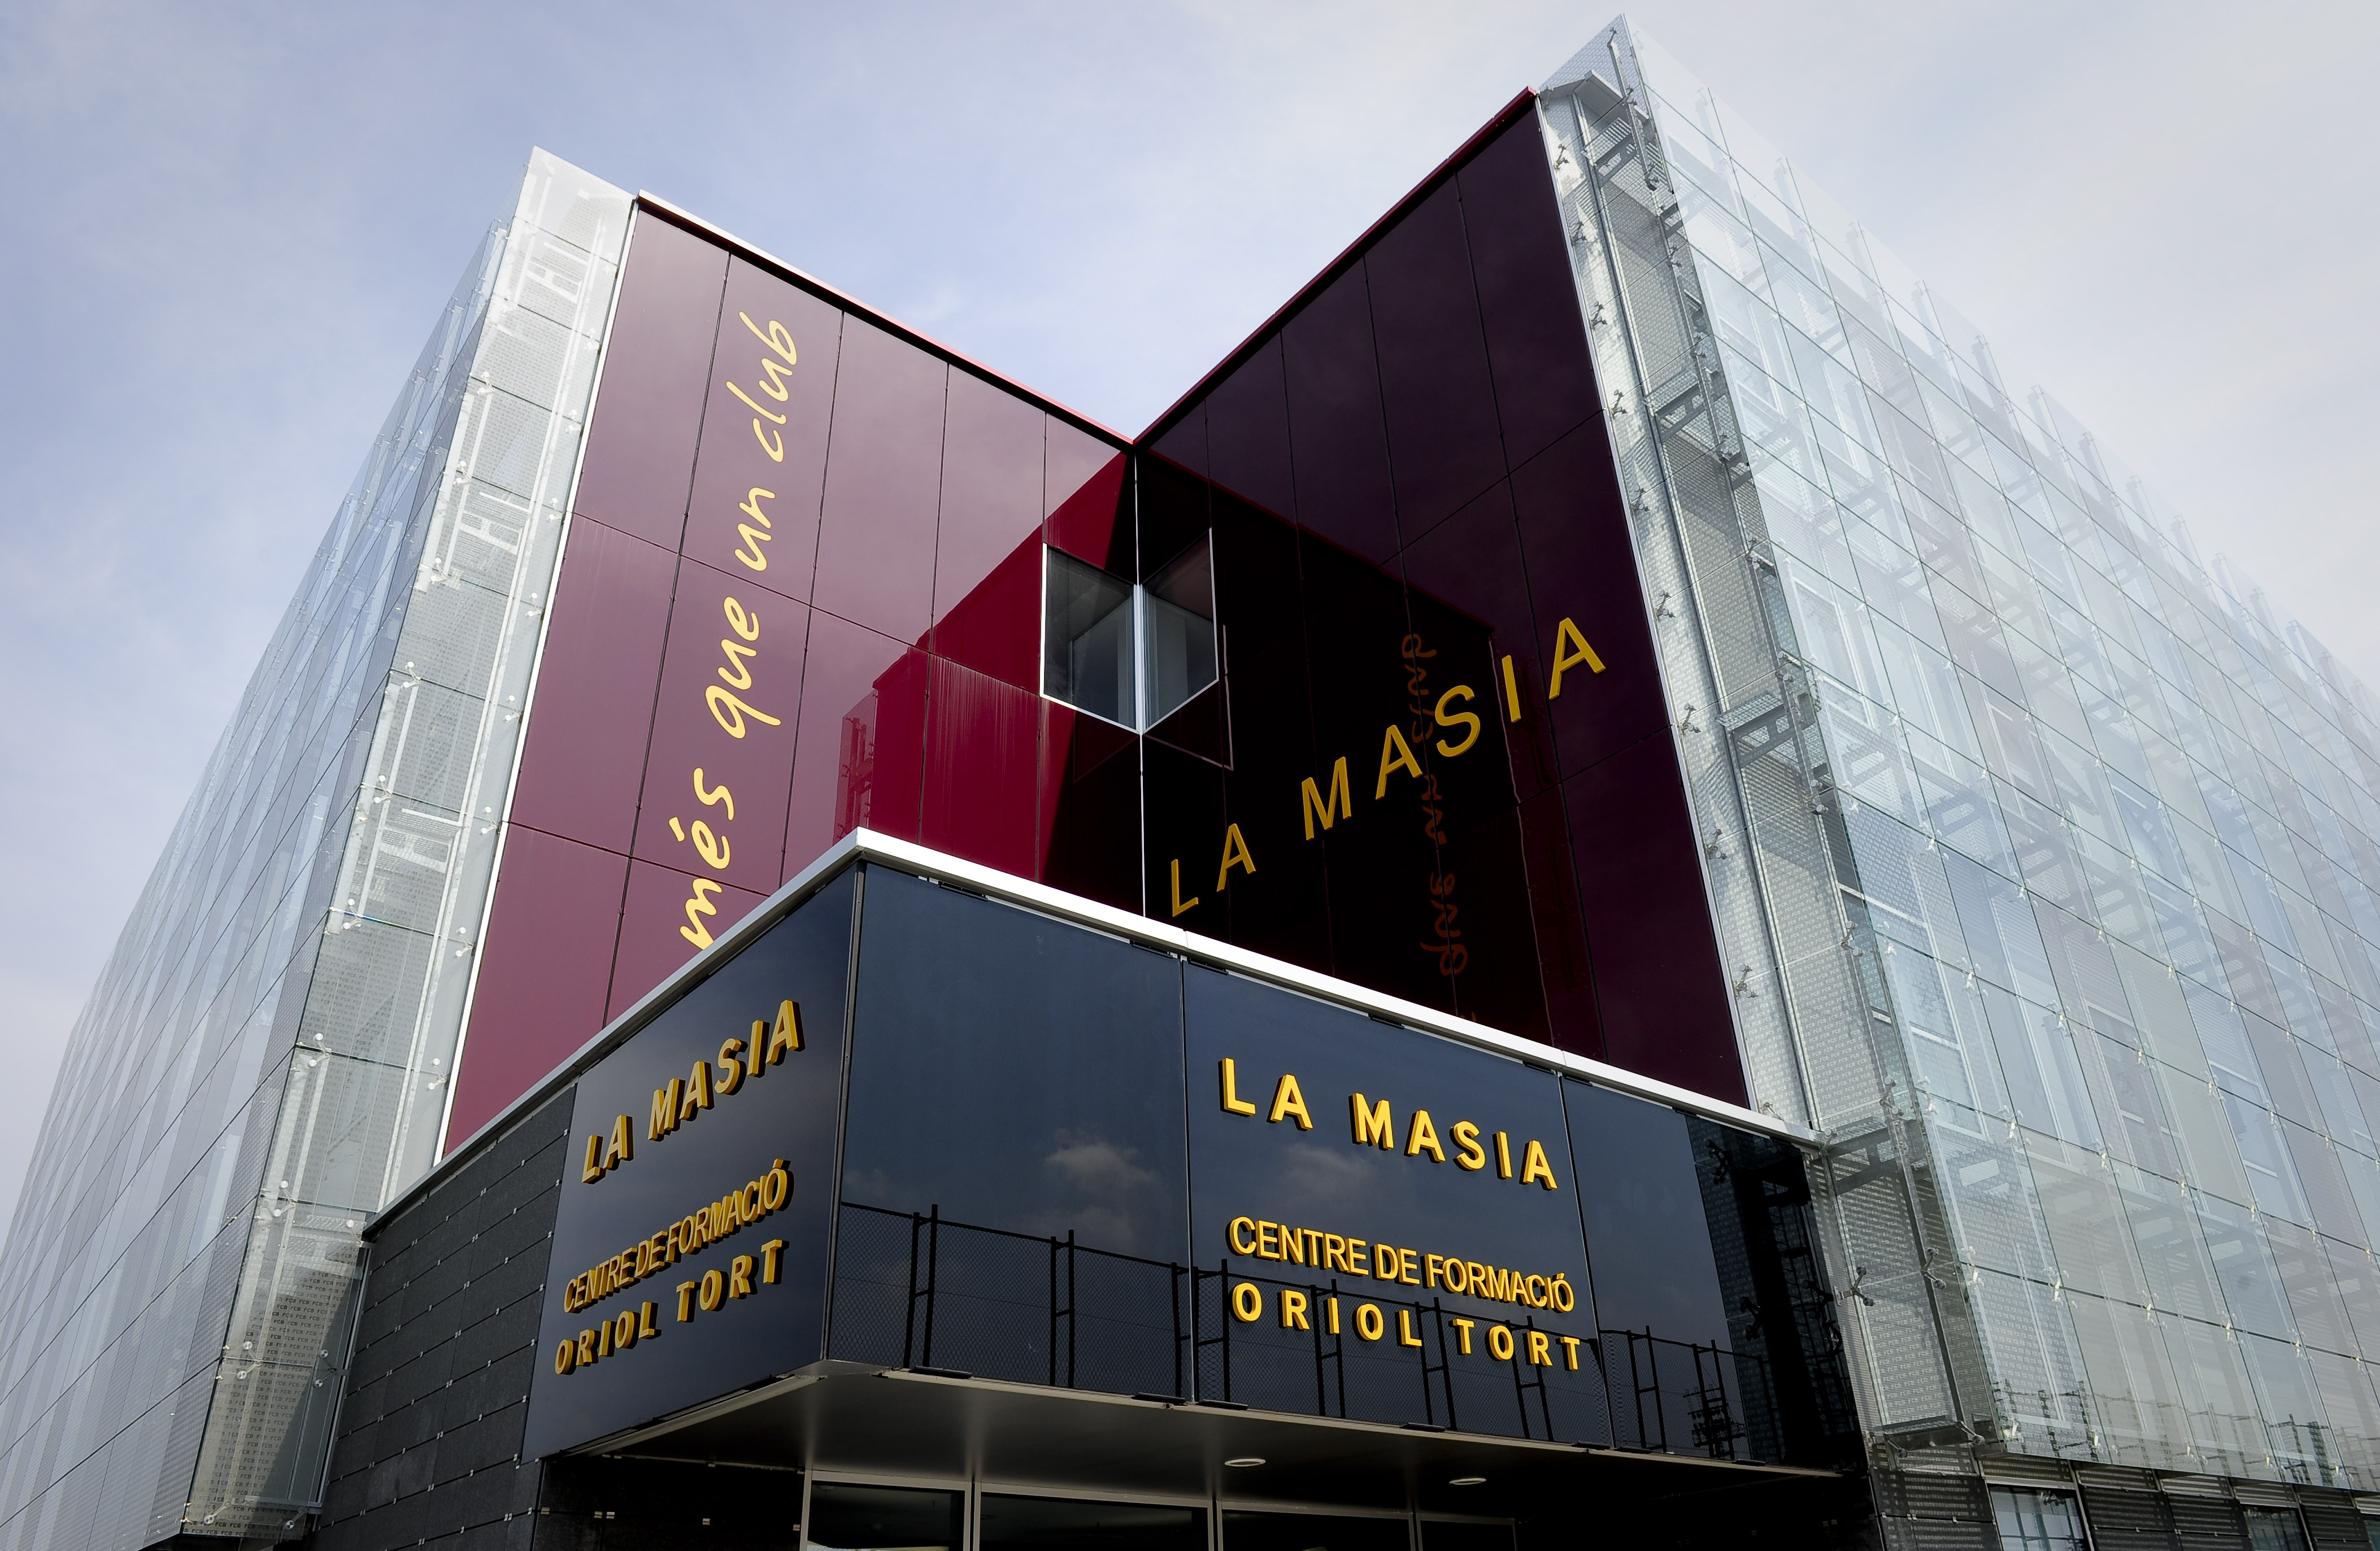 This pictured shows the new building named "La Masia" training centre Oriol Tort where young players of the Barcelona football club live and train, near the Camp Nou stadium in Barcelona  on August 5, 2011 .  AFP PHOTO/ JOSEP LAGO (Photo credit should read JOSEP LAGO/AFP/Getty Images)